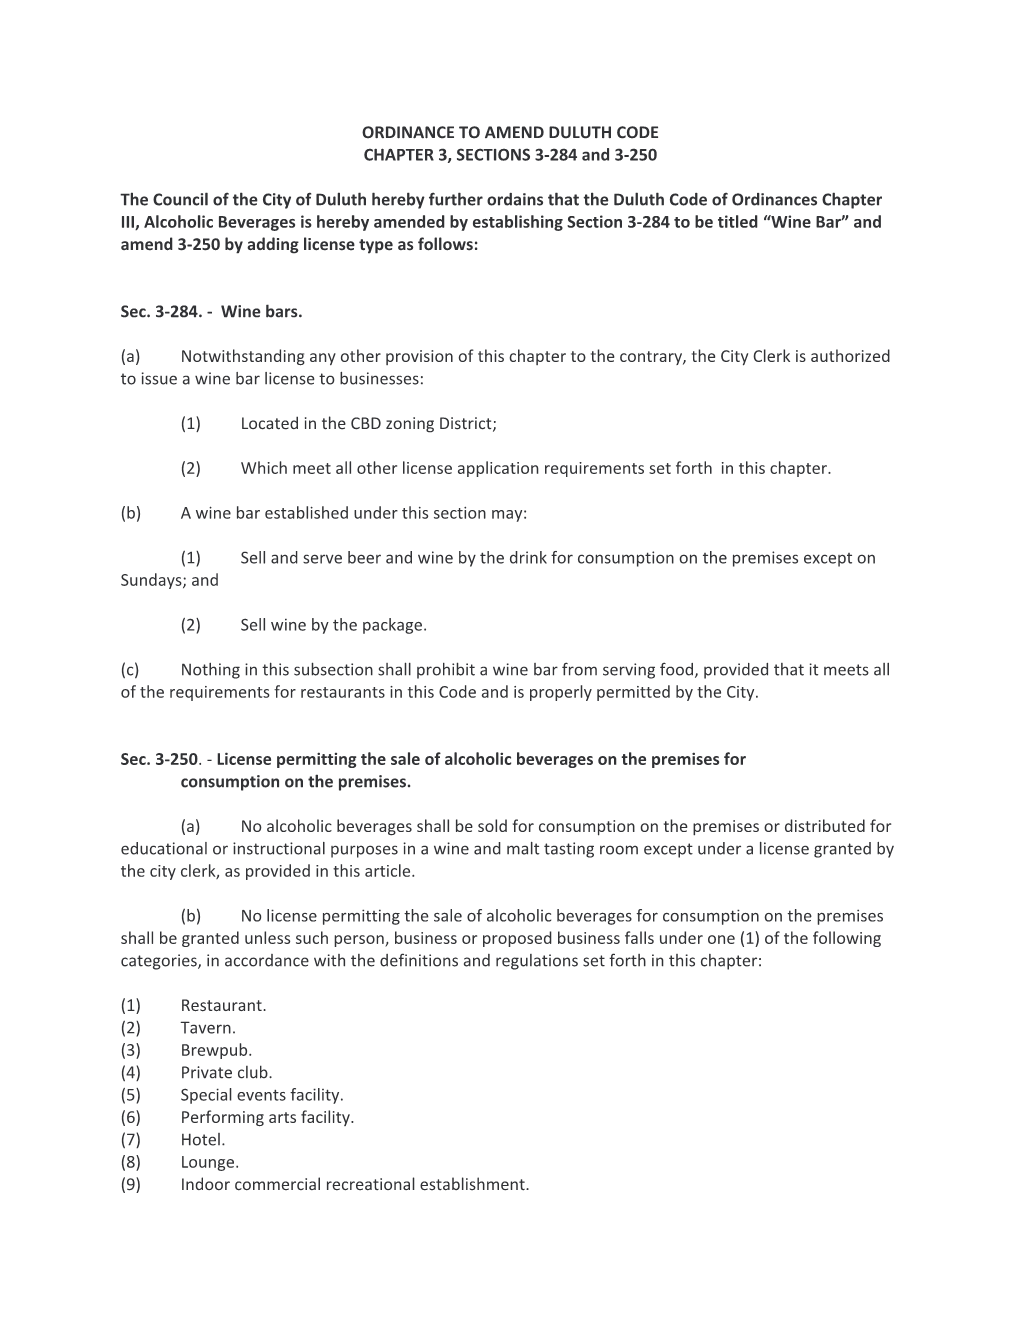 ORDINANCE to AMEND DULUTH CODE CHAPTER 3, SECTIONS 3-284 and 3-250